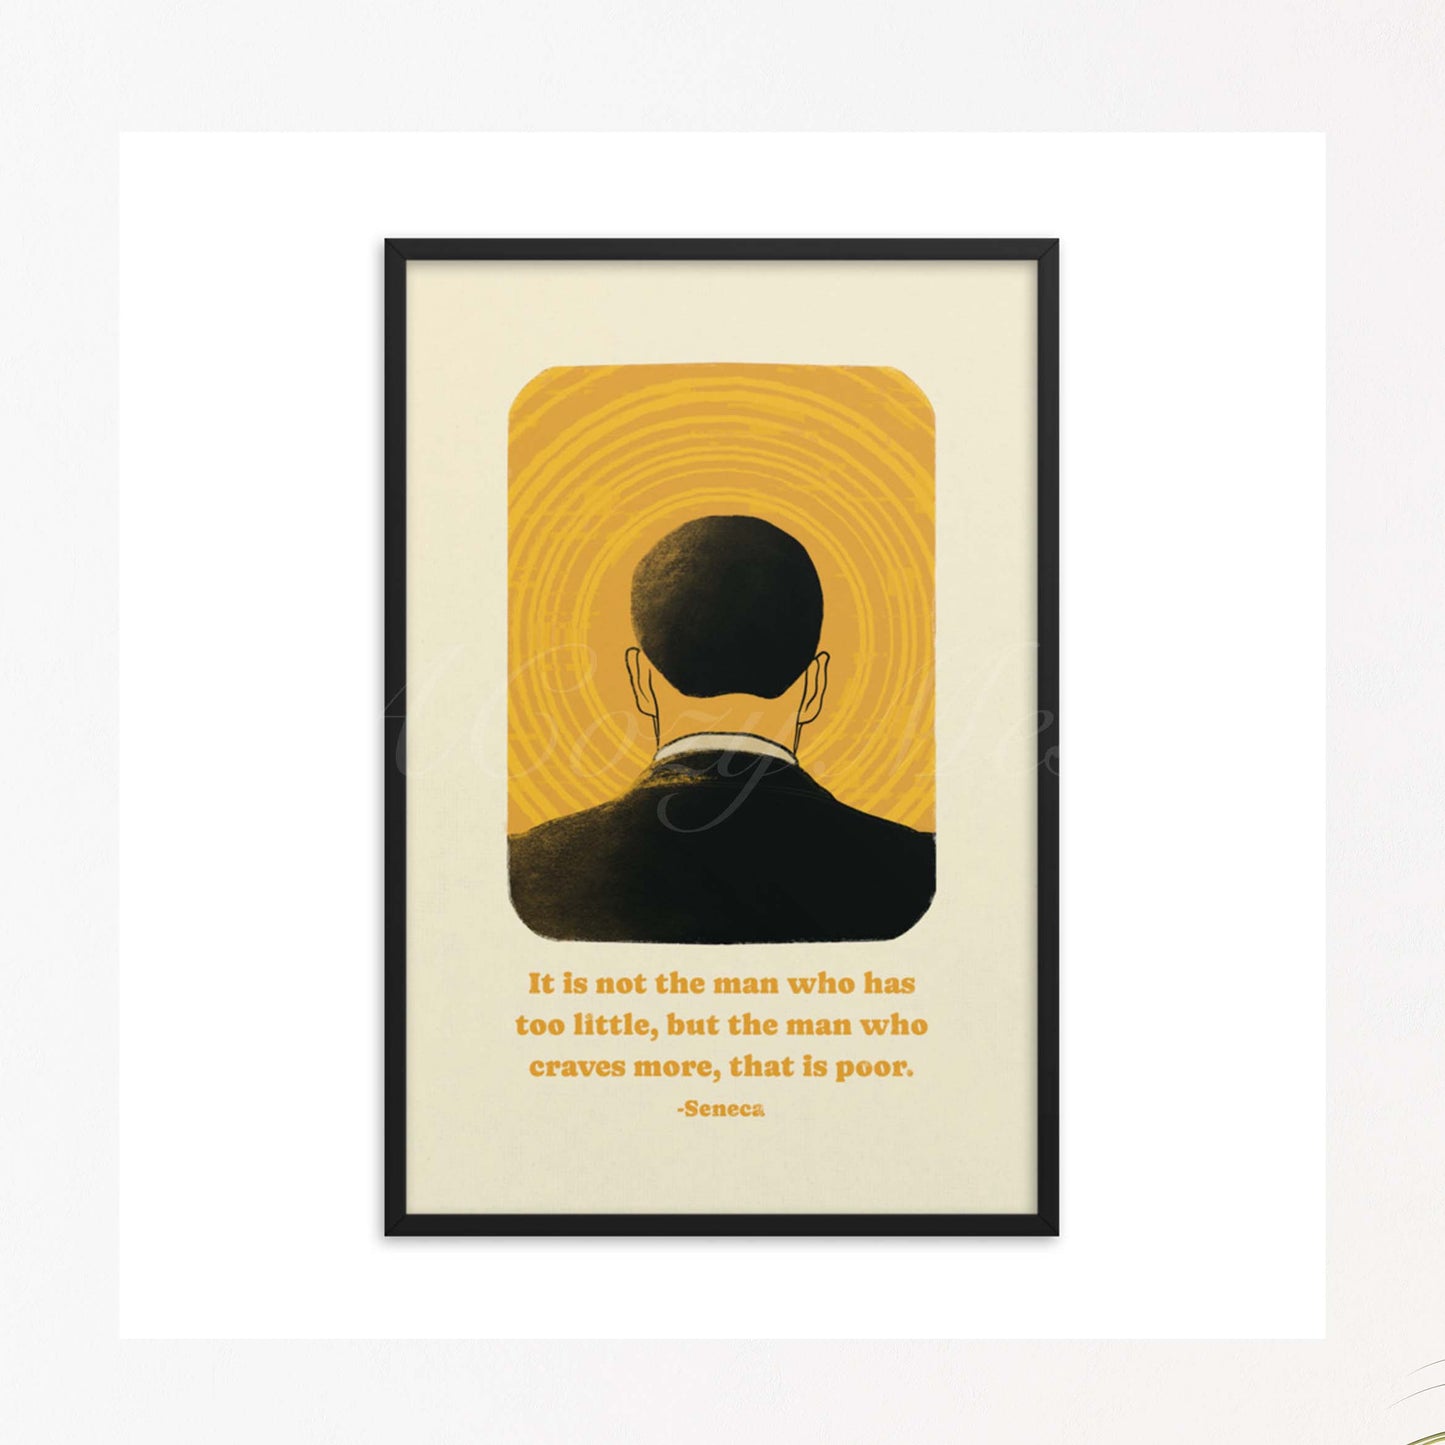 Art poster depicting the back of a man's head against a vibrant yellow background with concentric circles emanating from the center, resembling a halo or sun. Below the image is a quote by Seneca in elegant, readable font that reads, "It is not the man who has too little, but the man who craves more, that is poor." 